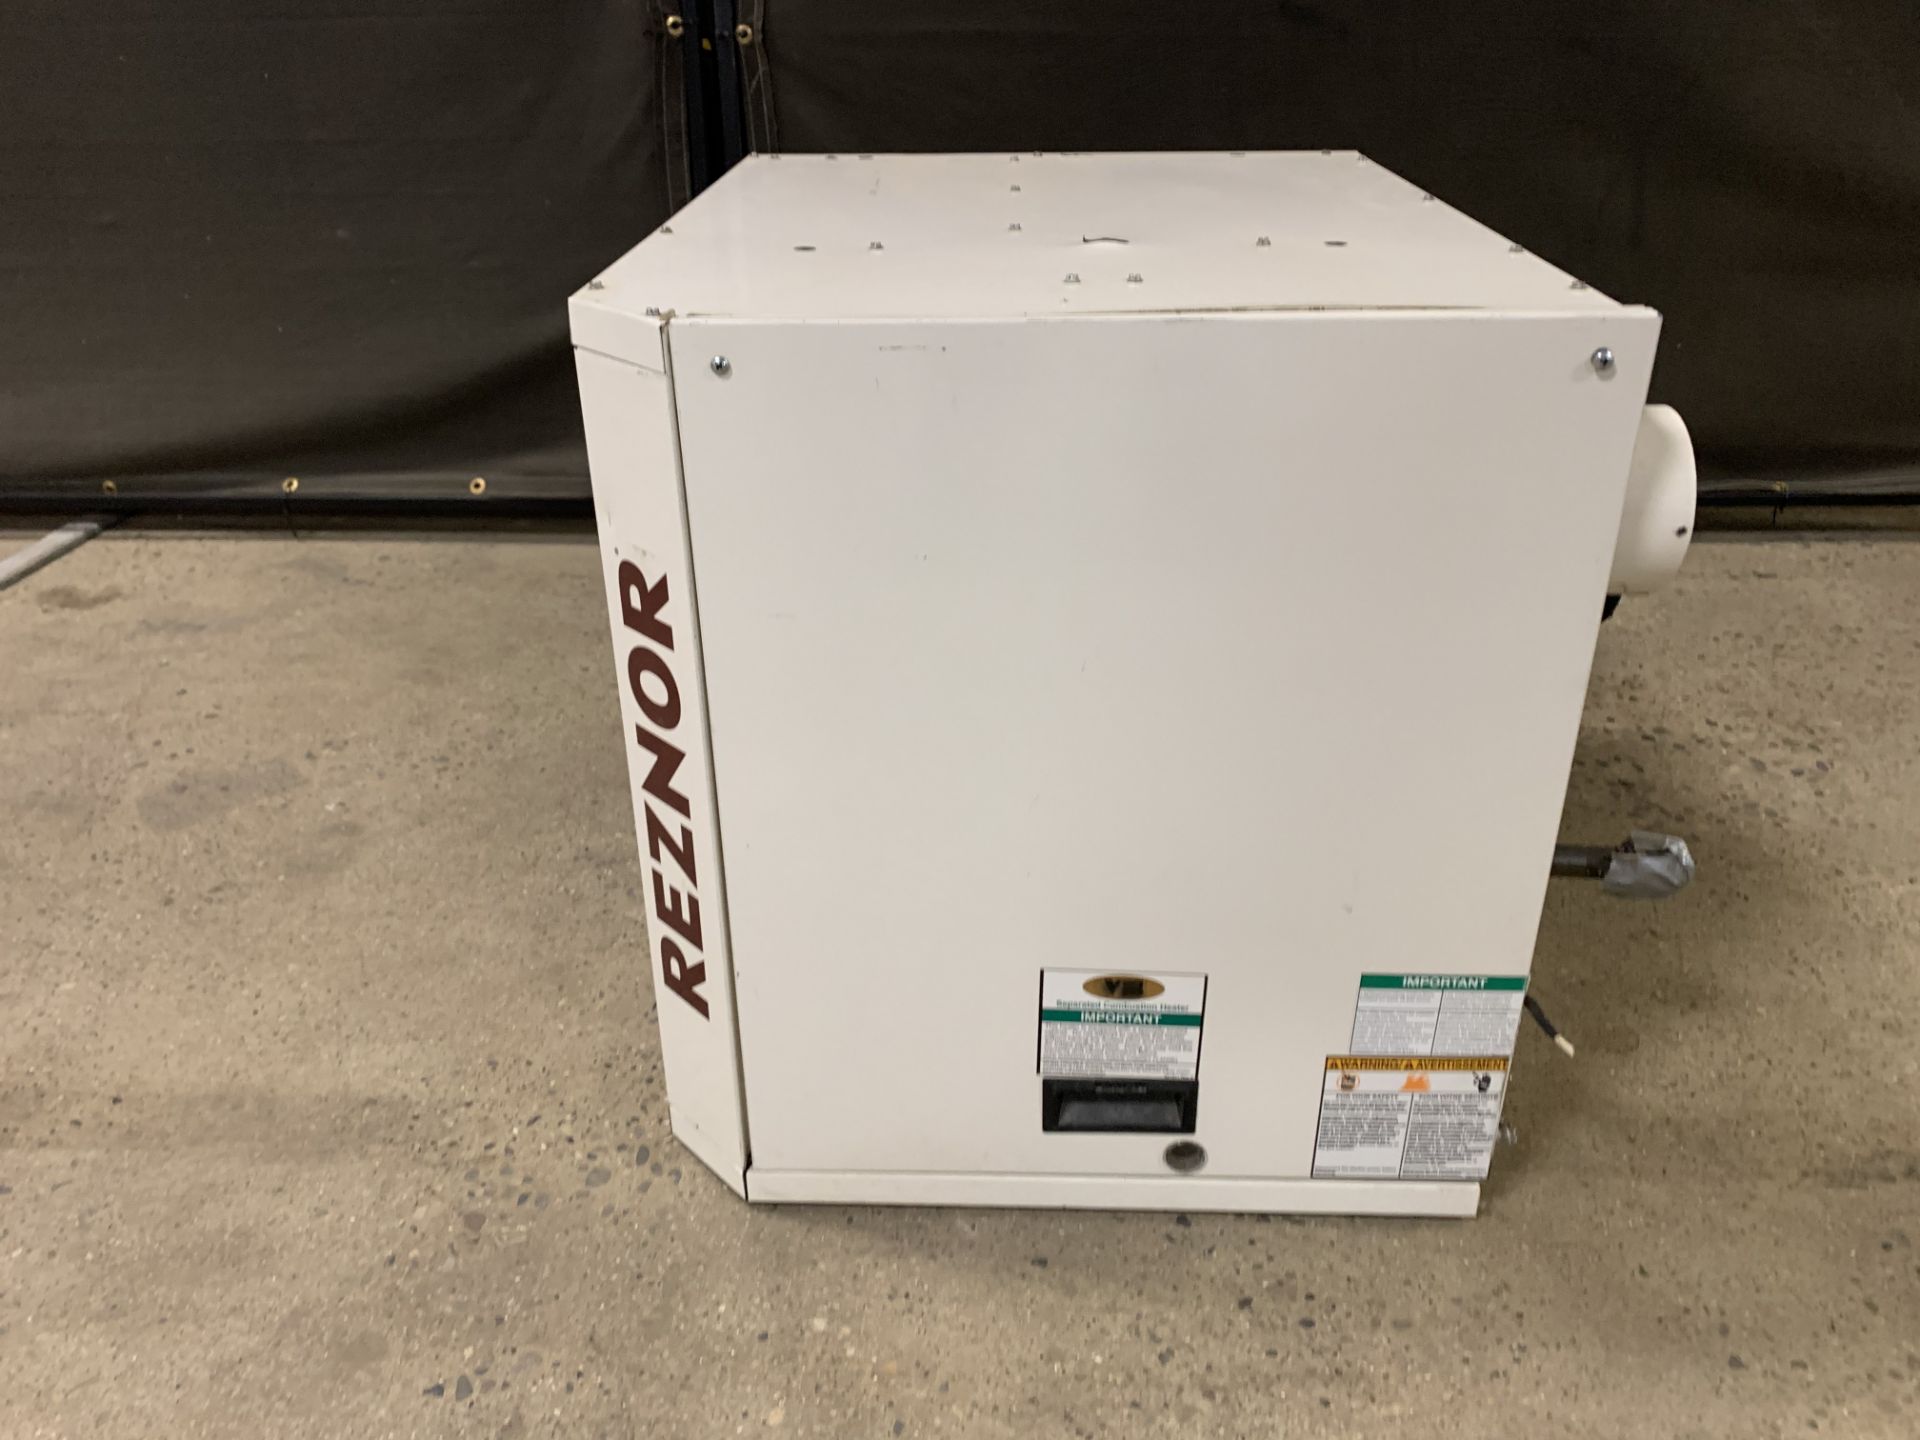 REZNOR V3 SERIES UDAS125 GAS-FIRED SEPARATED COMBUSTION HEATER UNIT, INPUT 120,000 BTUH, OUTPUT 99, - Image 4 of 12